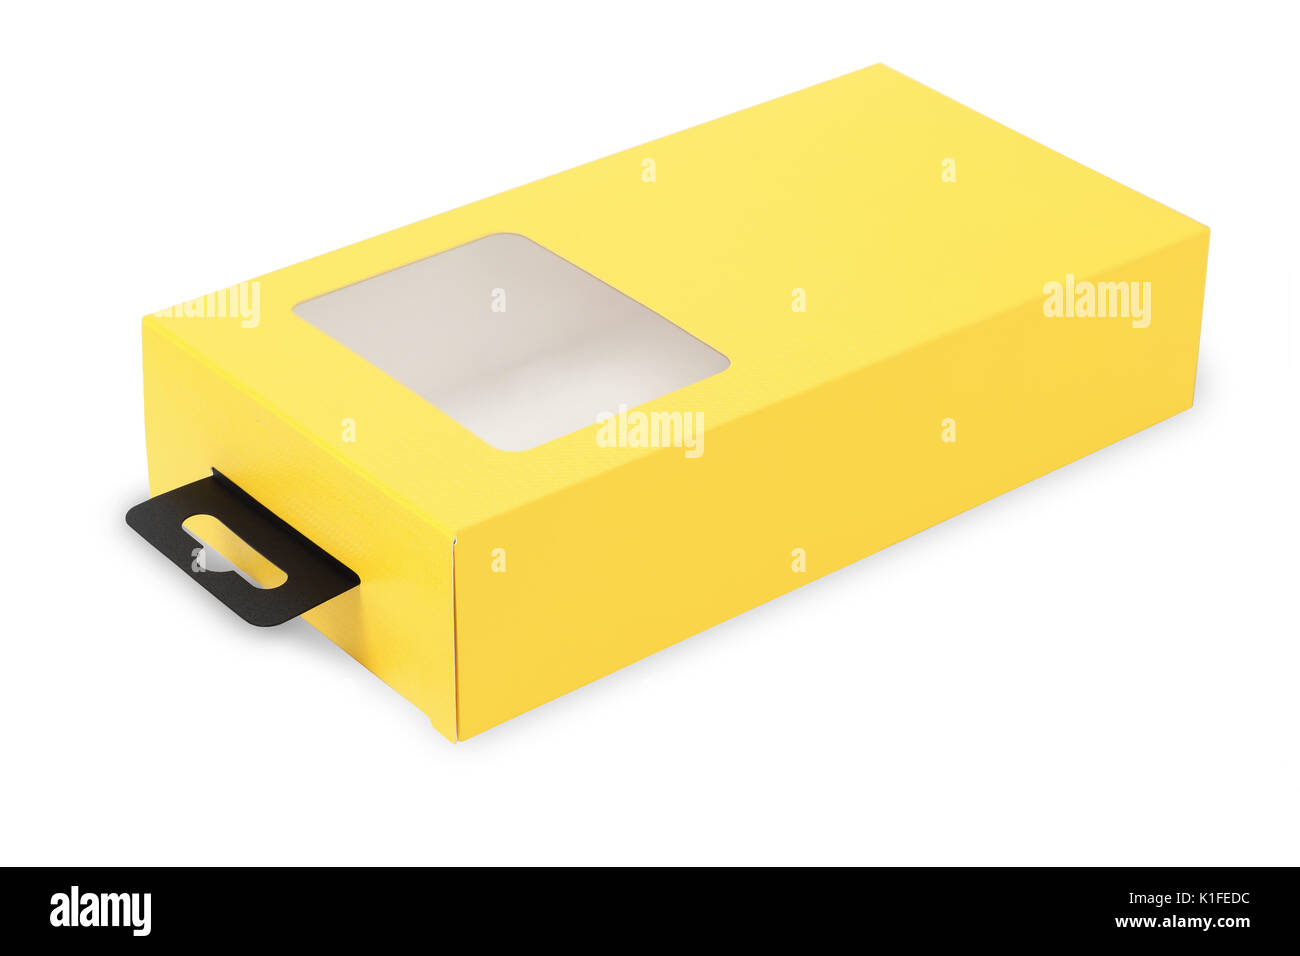 Yellow Product Packaging Box Lying on White background Stock Photo